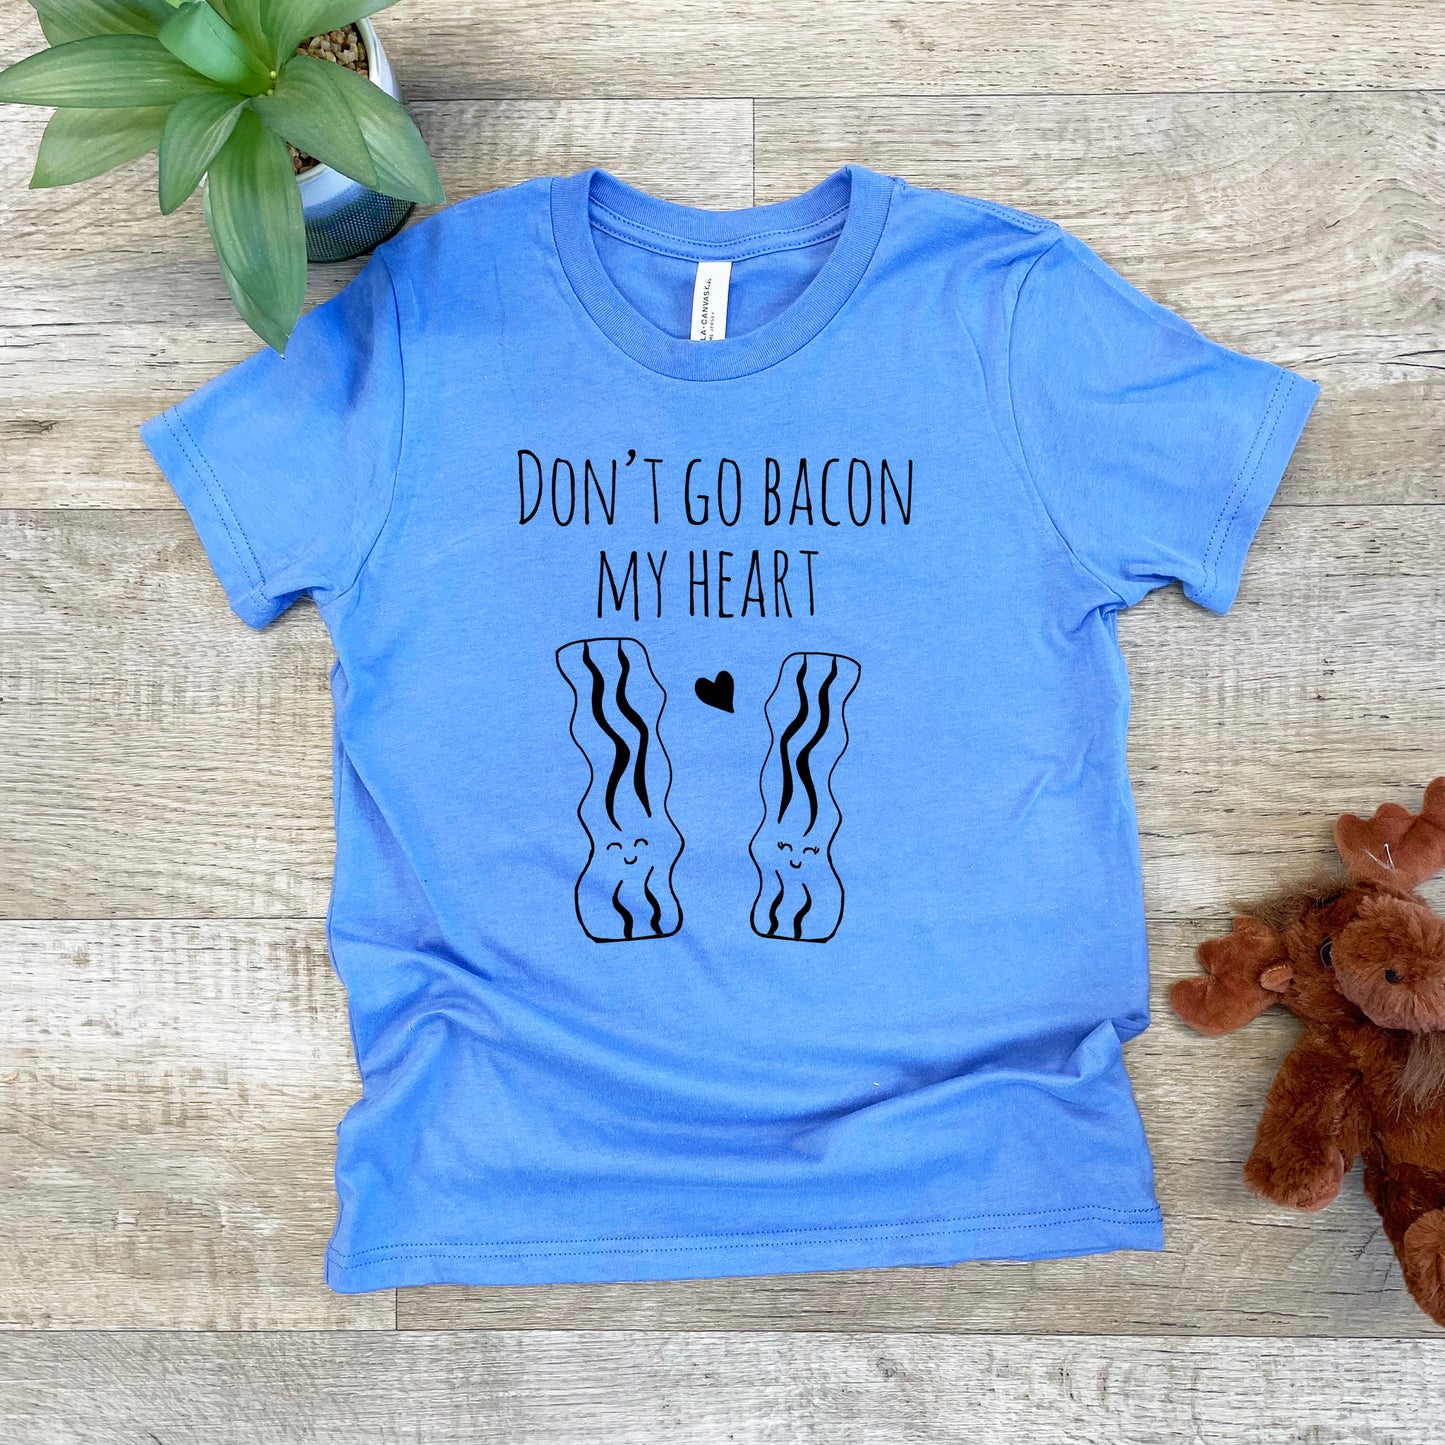 Don't Go Bacon My Heart - Kid's Tee - Columbia Blue or Lavender